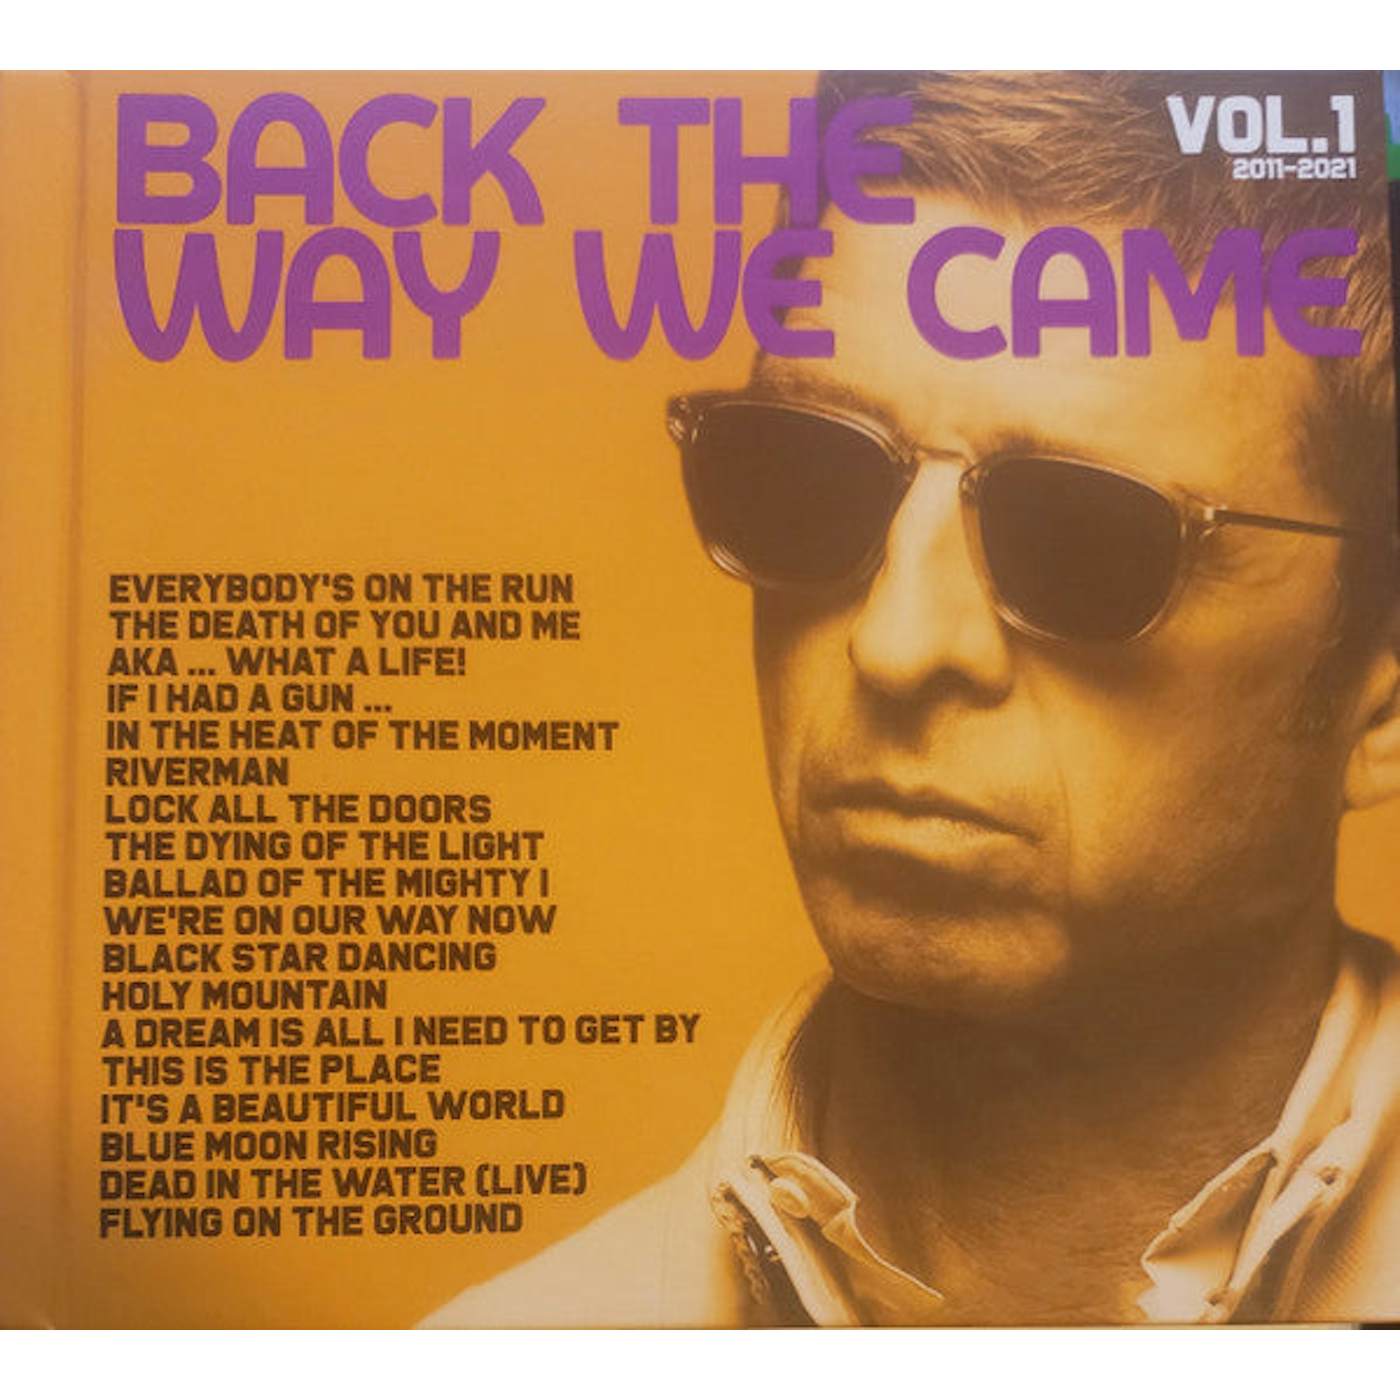 Noel Gallagher's High Flying Birds CD - Back The Way We Came: Vol. 1 (20. 11 -20. 21) (Deluxe Edition)